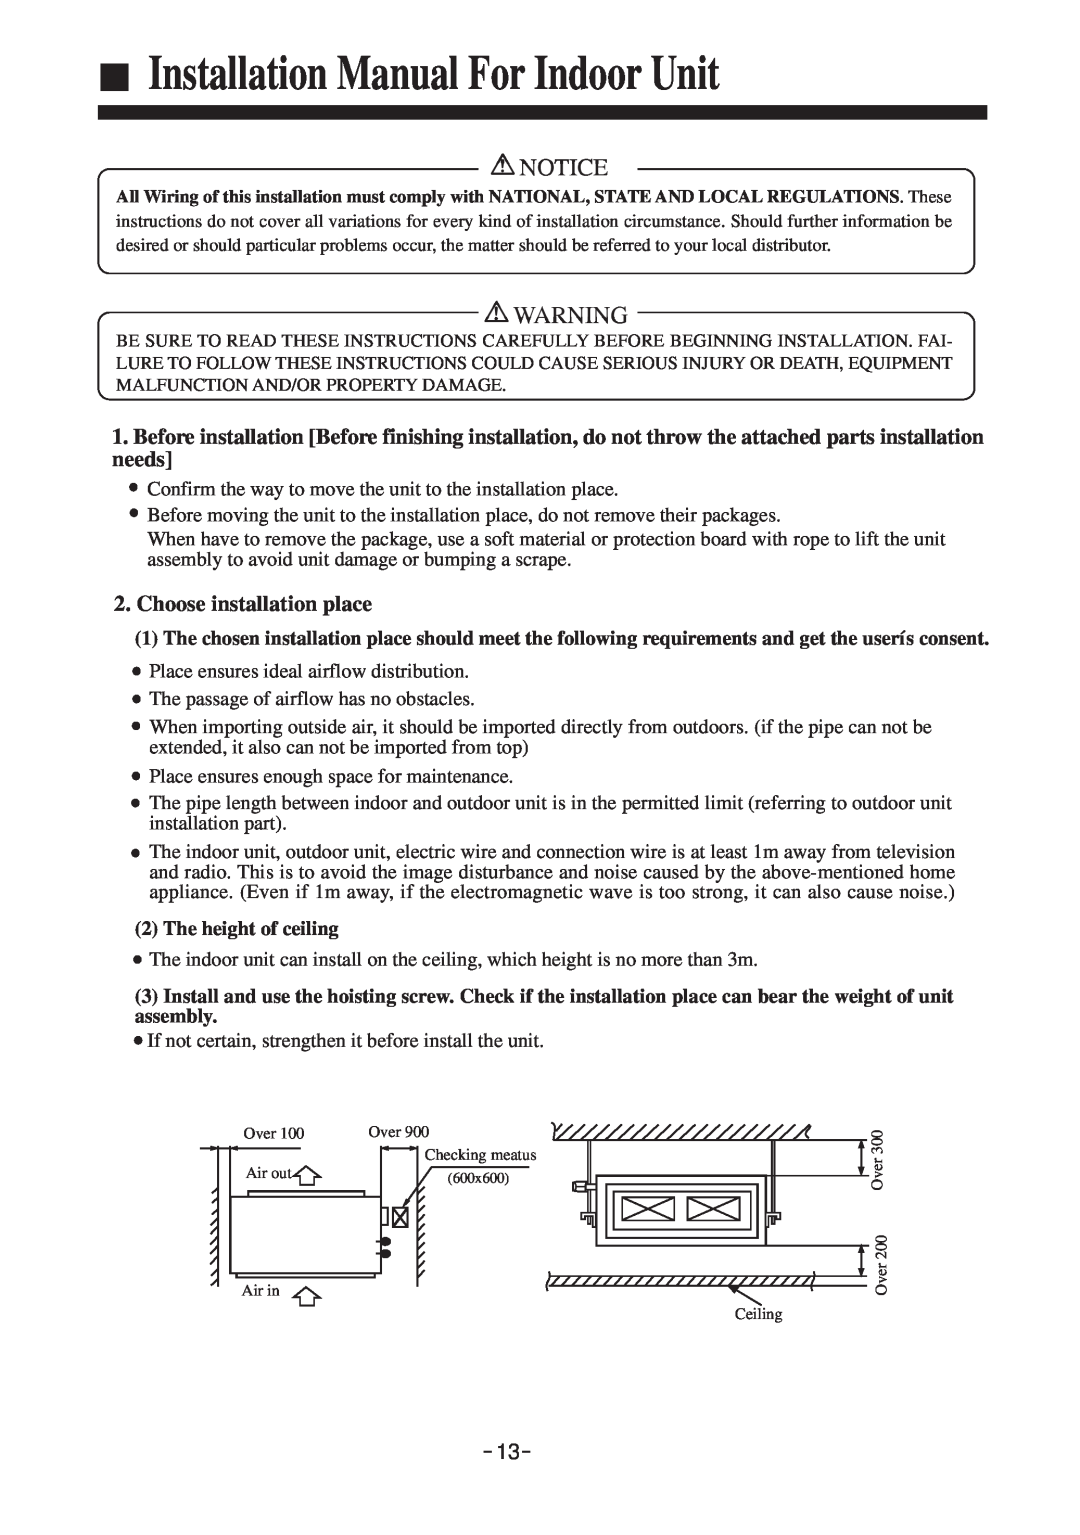 Haier AD28NAHBEA, AD242AHBEA, AD52NAHBEA, AD36NAHBEA Installation Manual For Indoor Unit, Choose installation place 